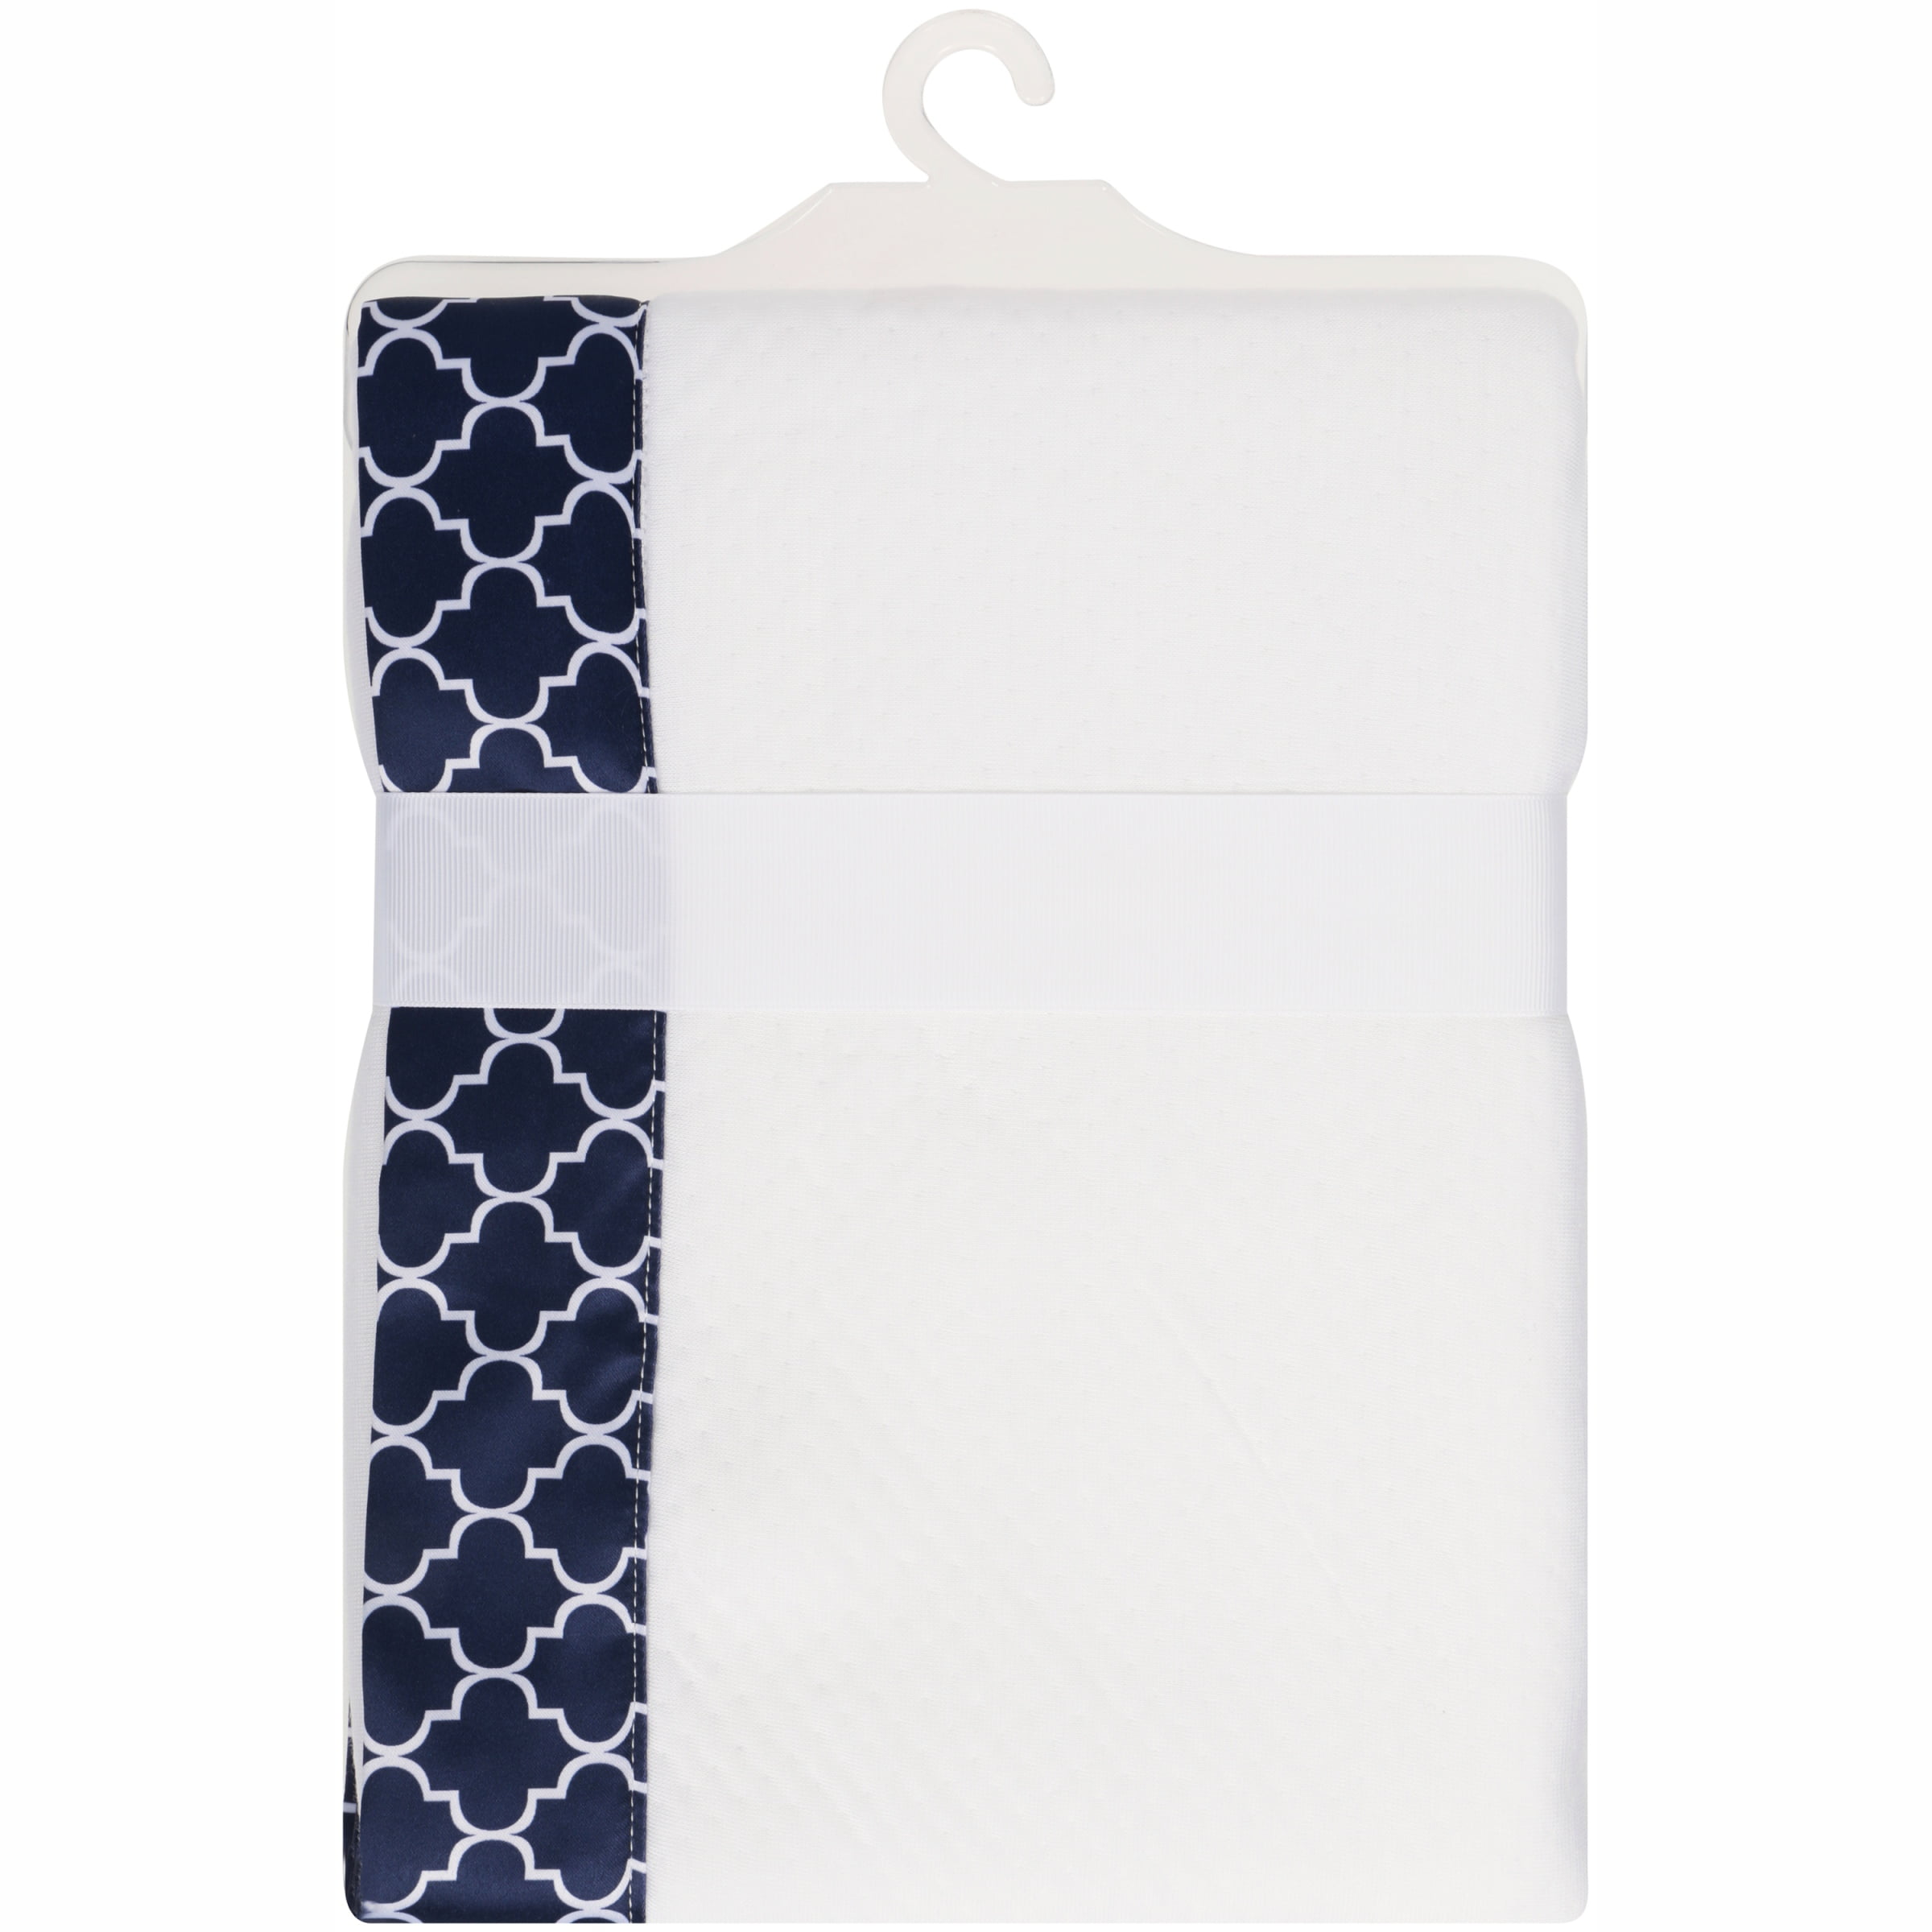 BreathableBaby Deluxe Modal Knit Baby Blanket – Navy Moroccan